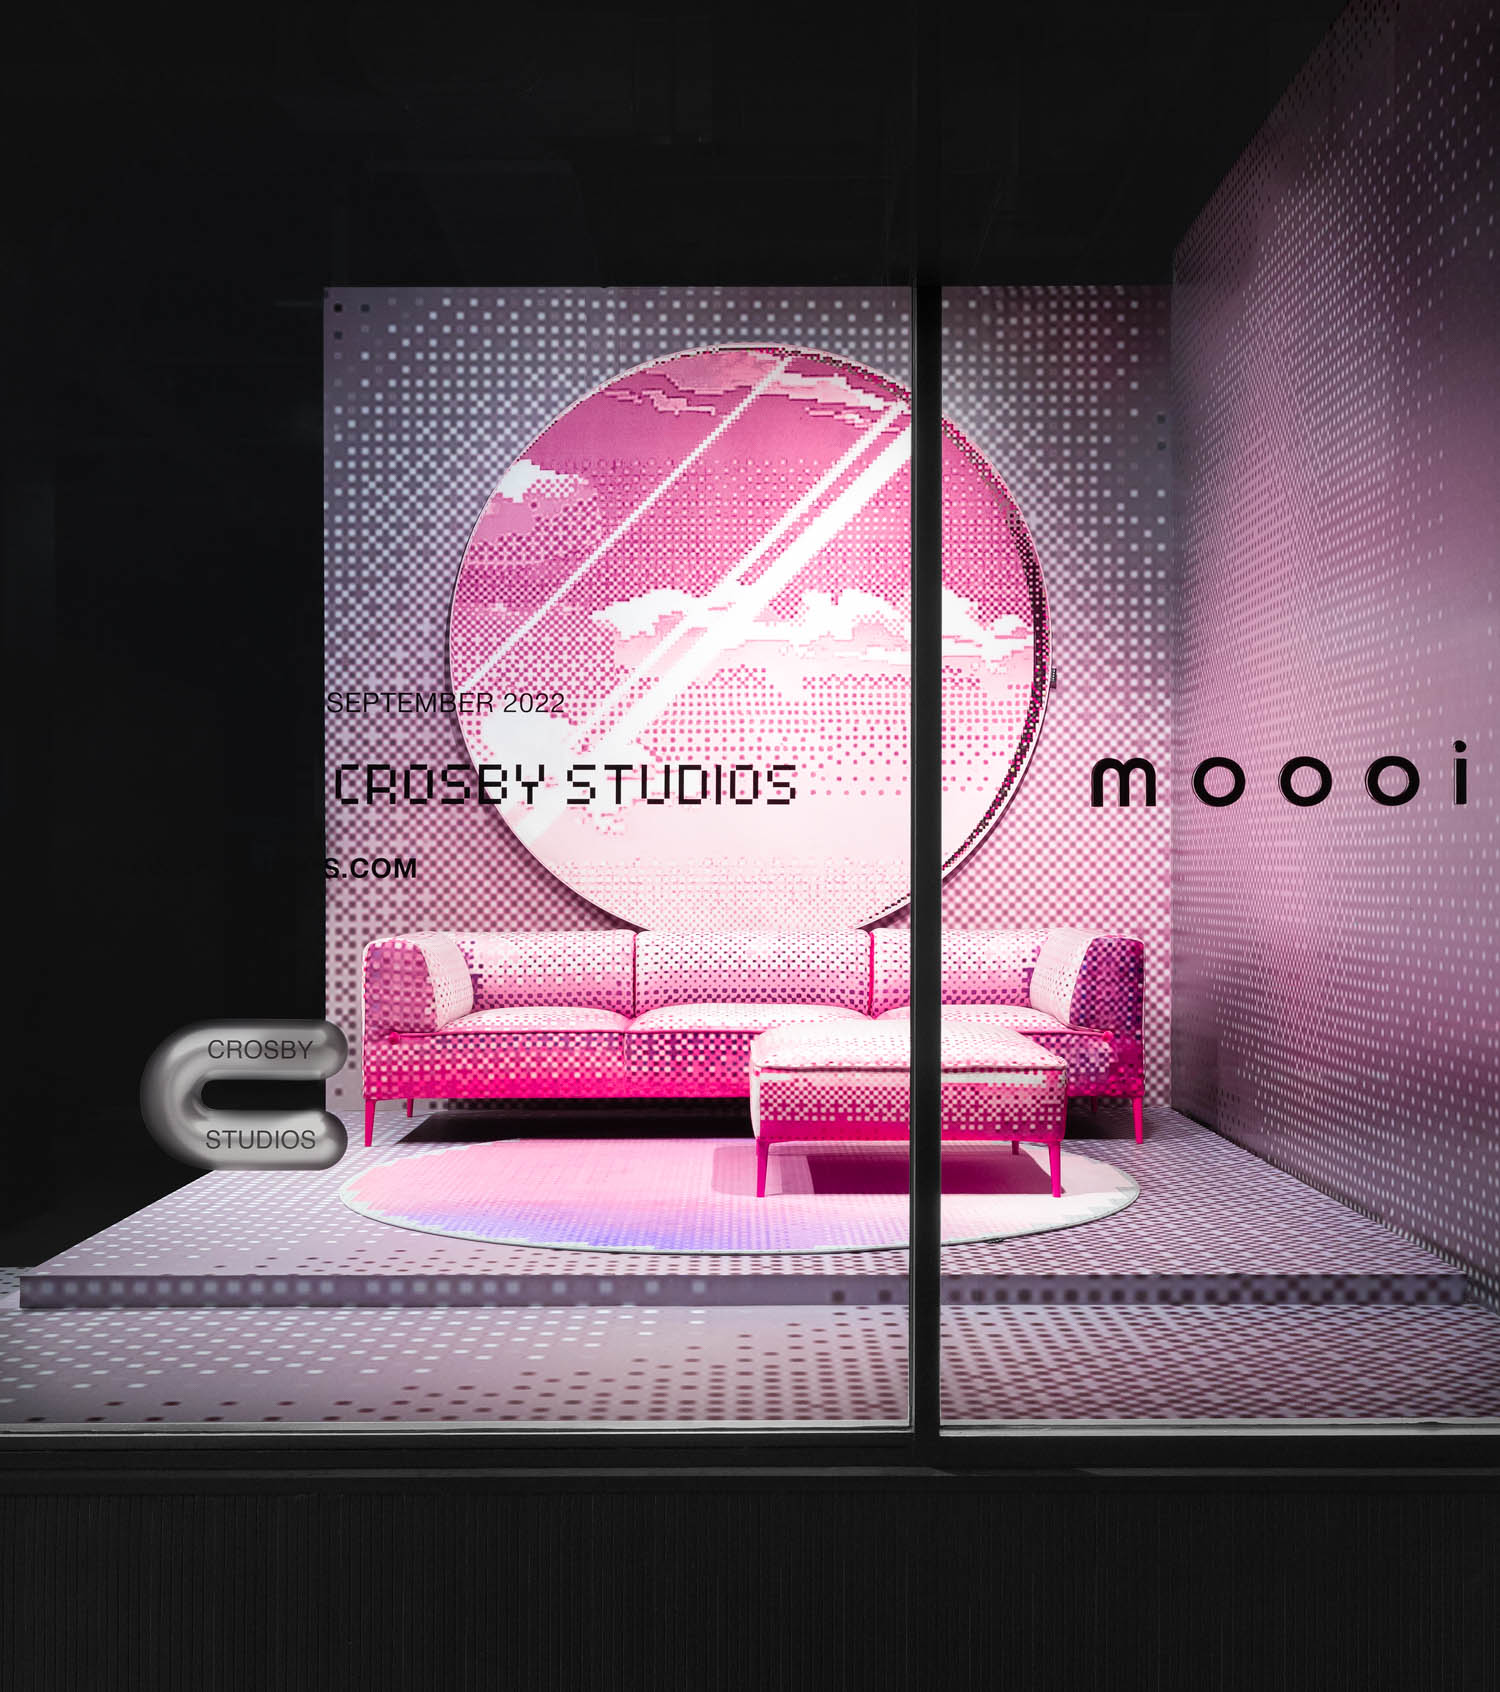 Crosby Studio’s founder, the artist, architect, and designer Harry Nuriev, was given complete freedom to rethink Moooi’s New York storefront.